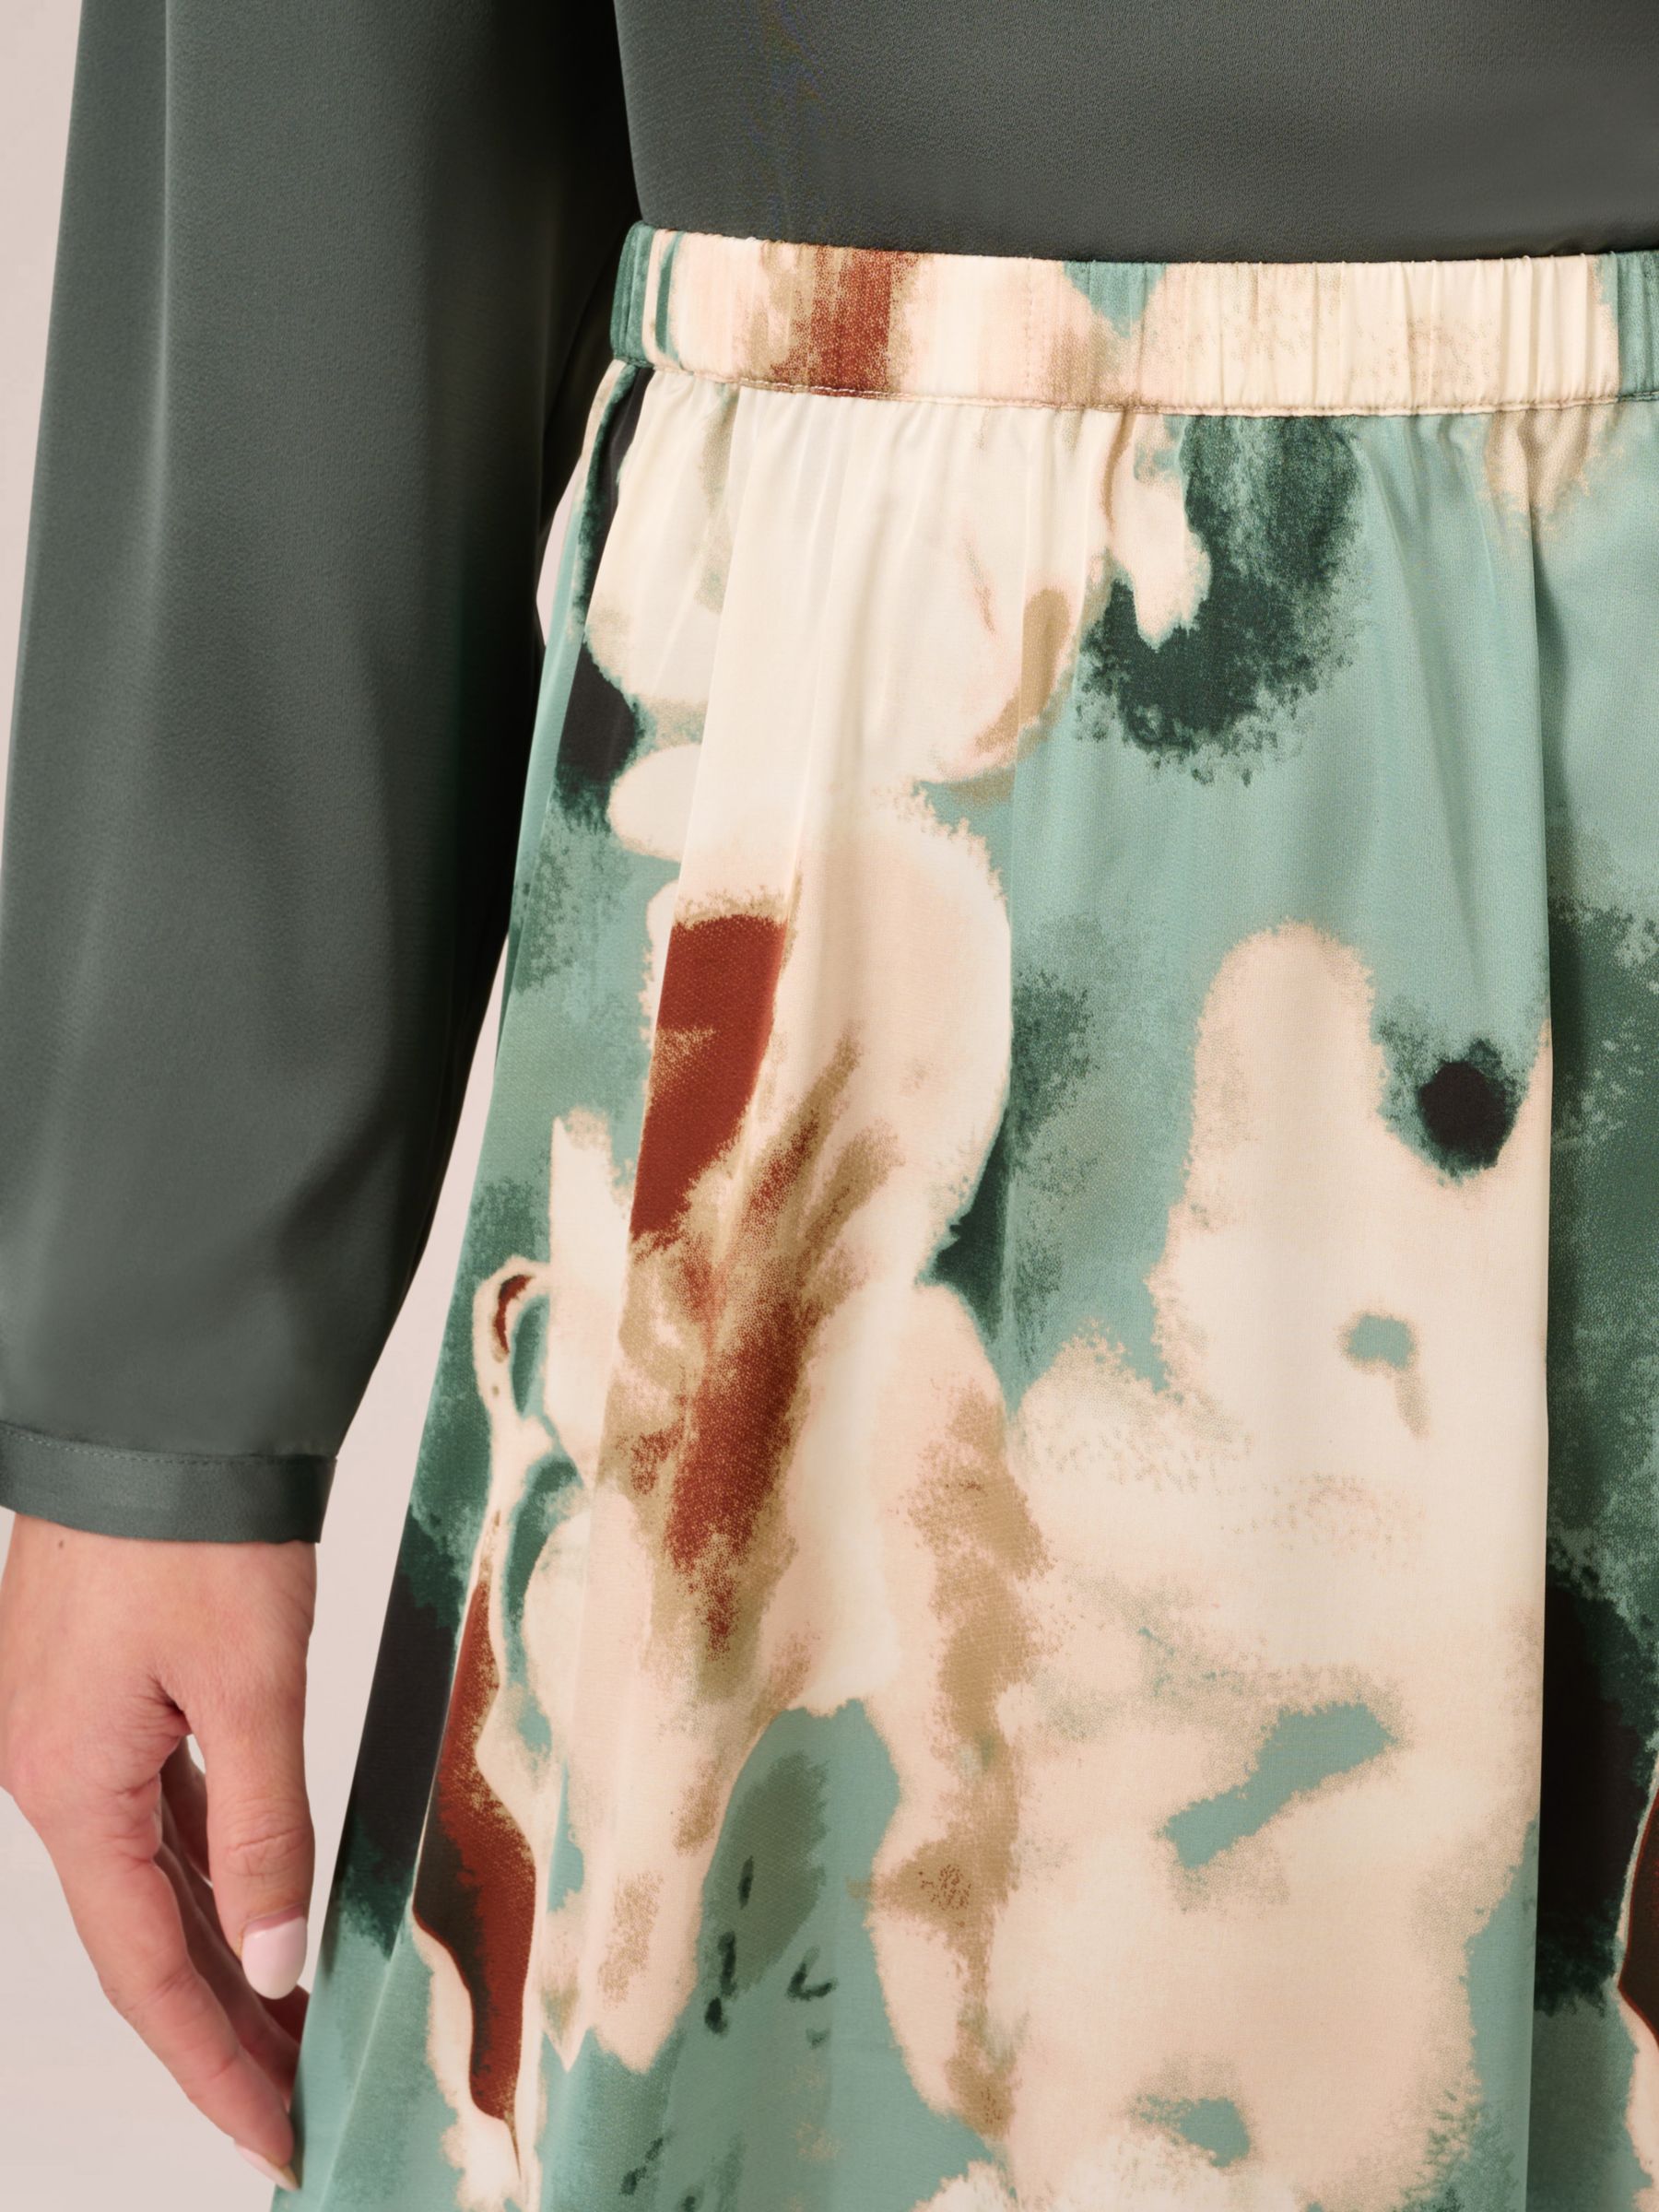 Buy Adrianna Papell Printed A-Line Skirt, Dusty Seafoam Online at johnlewis.com